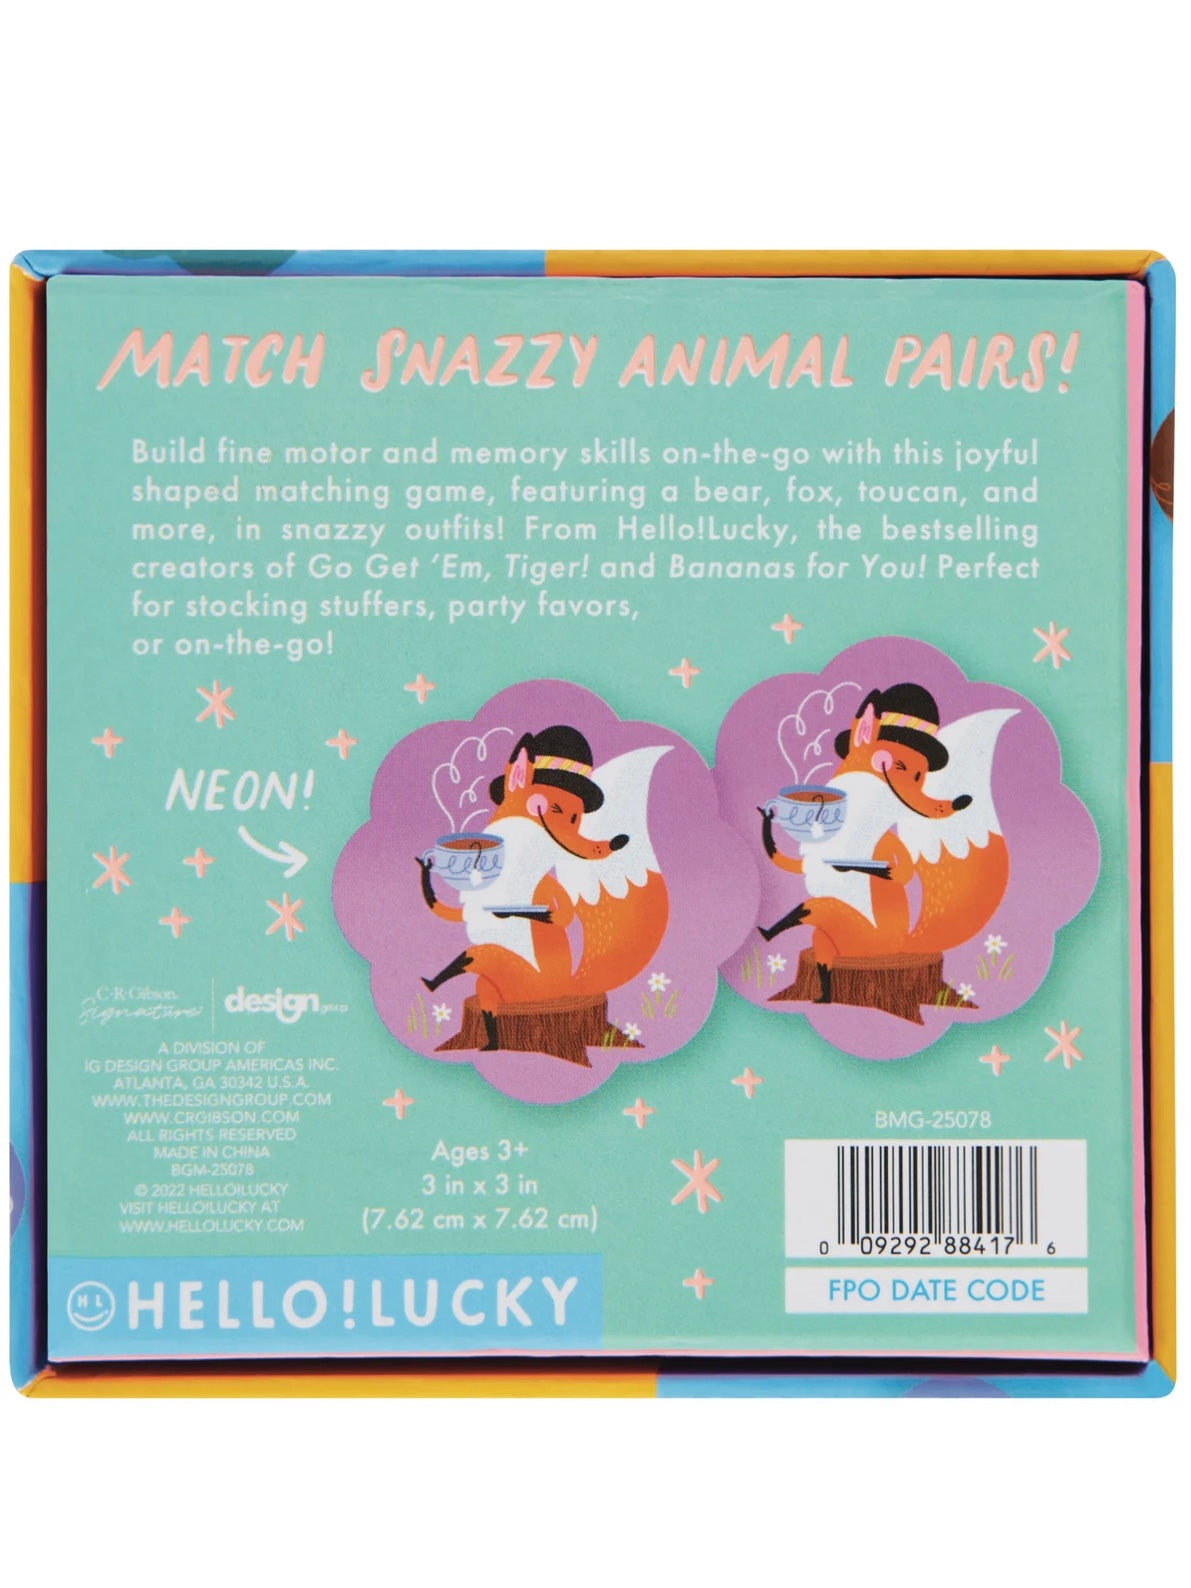 Snazzy Animals Match Game